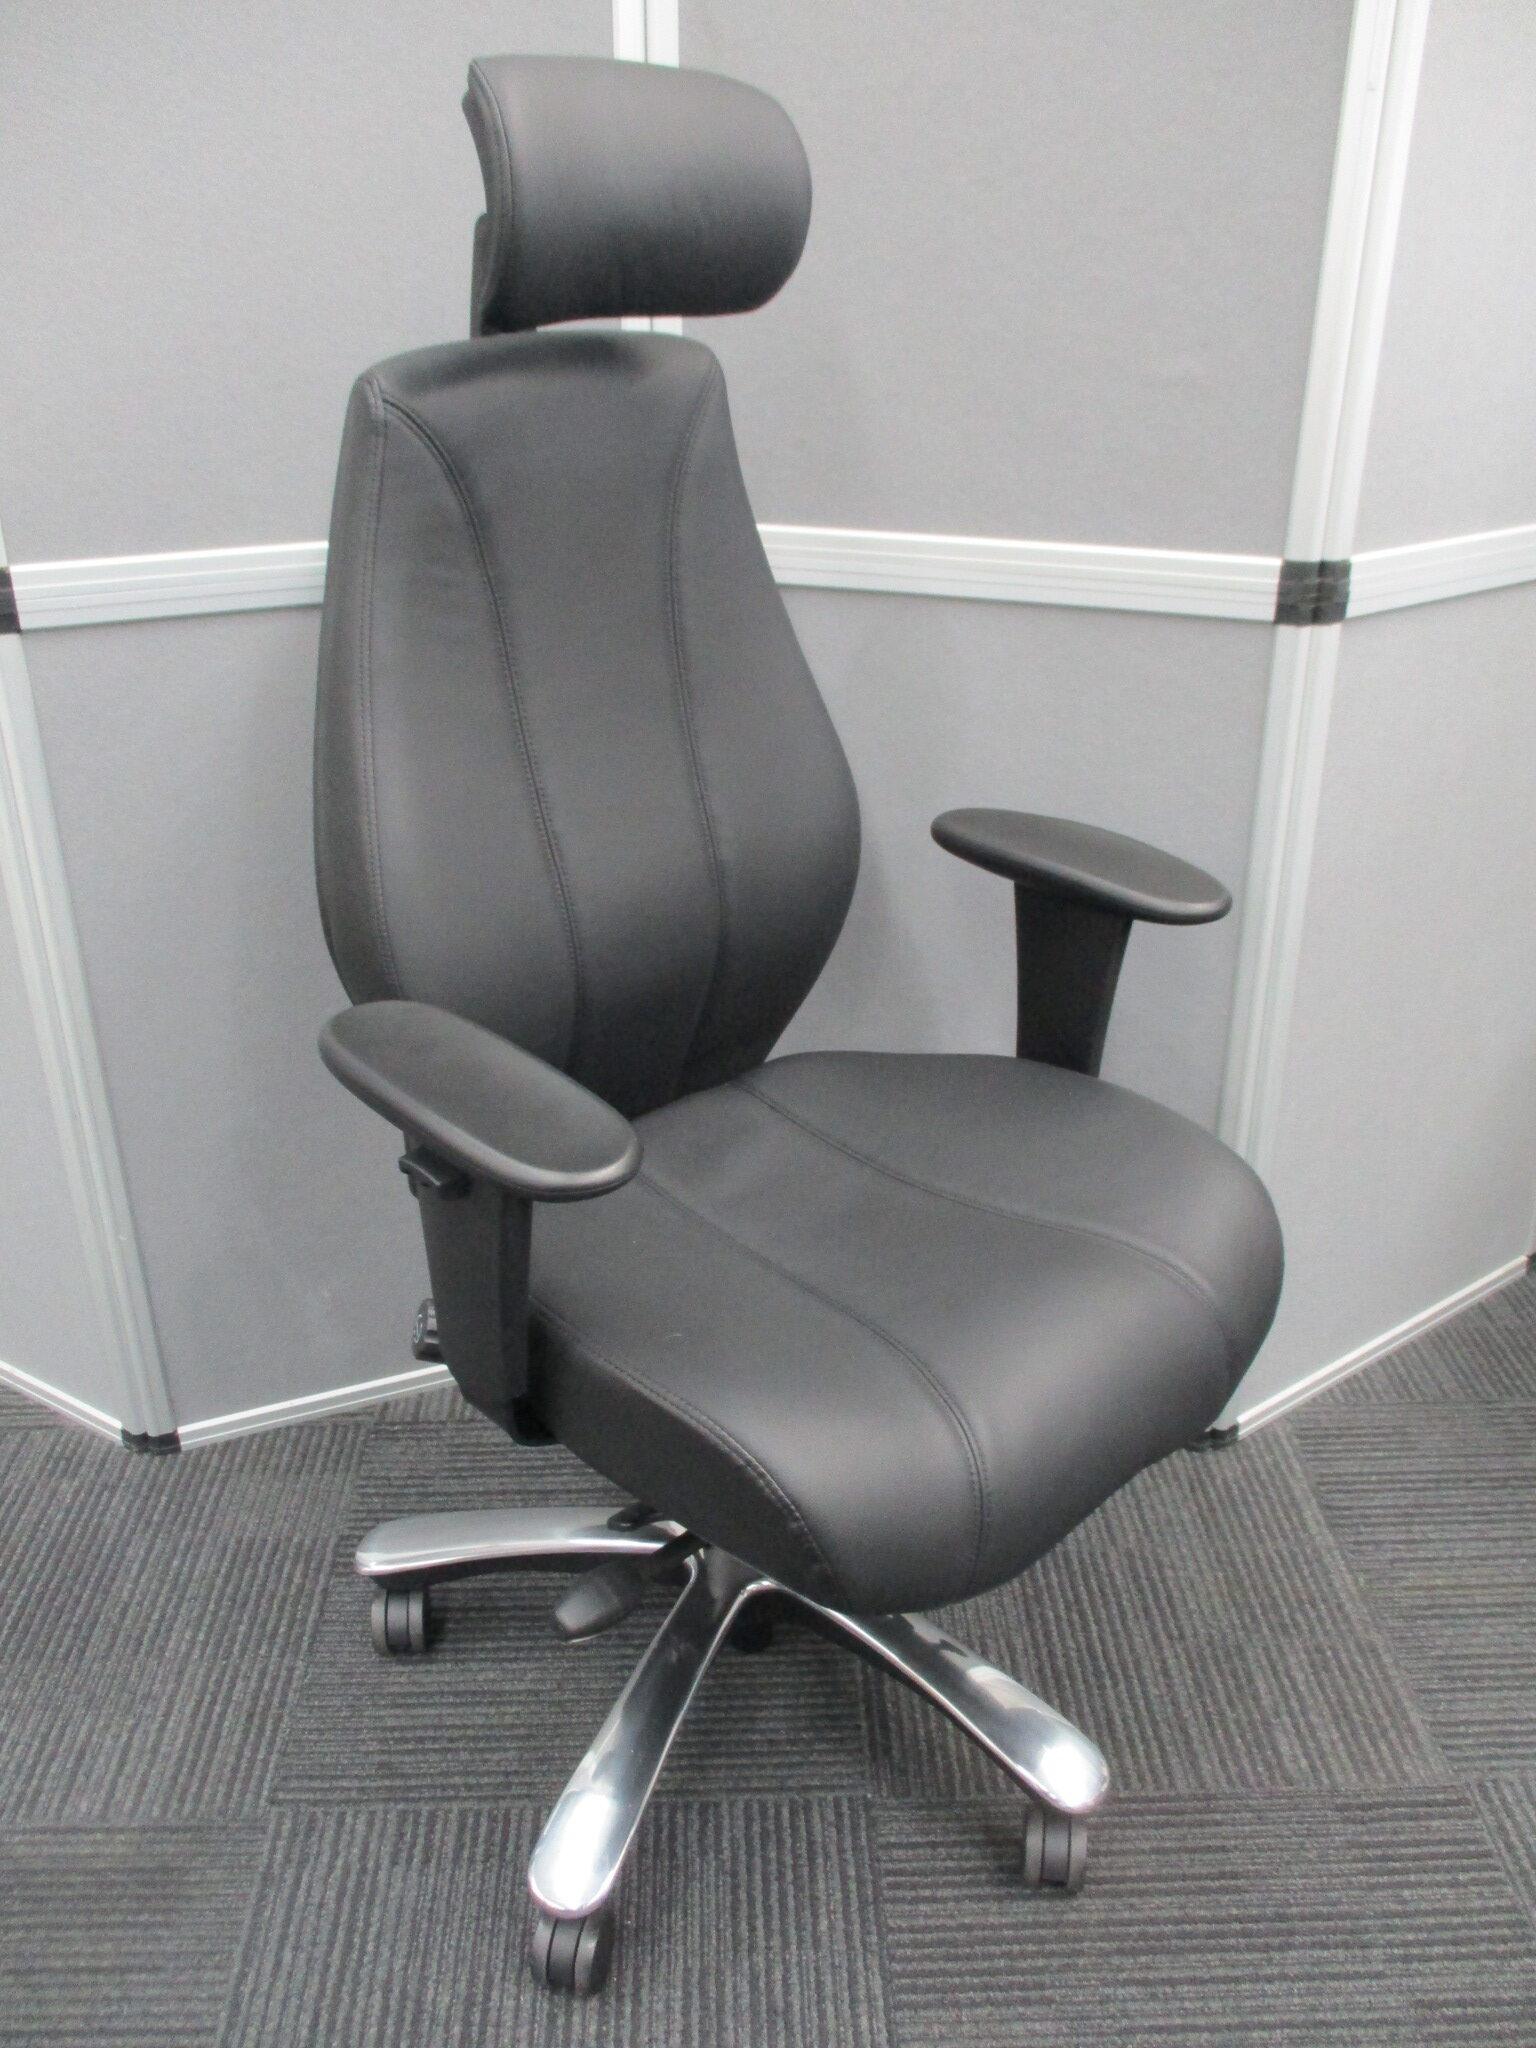 New Raptor Leather Chairs $1890